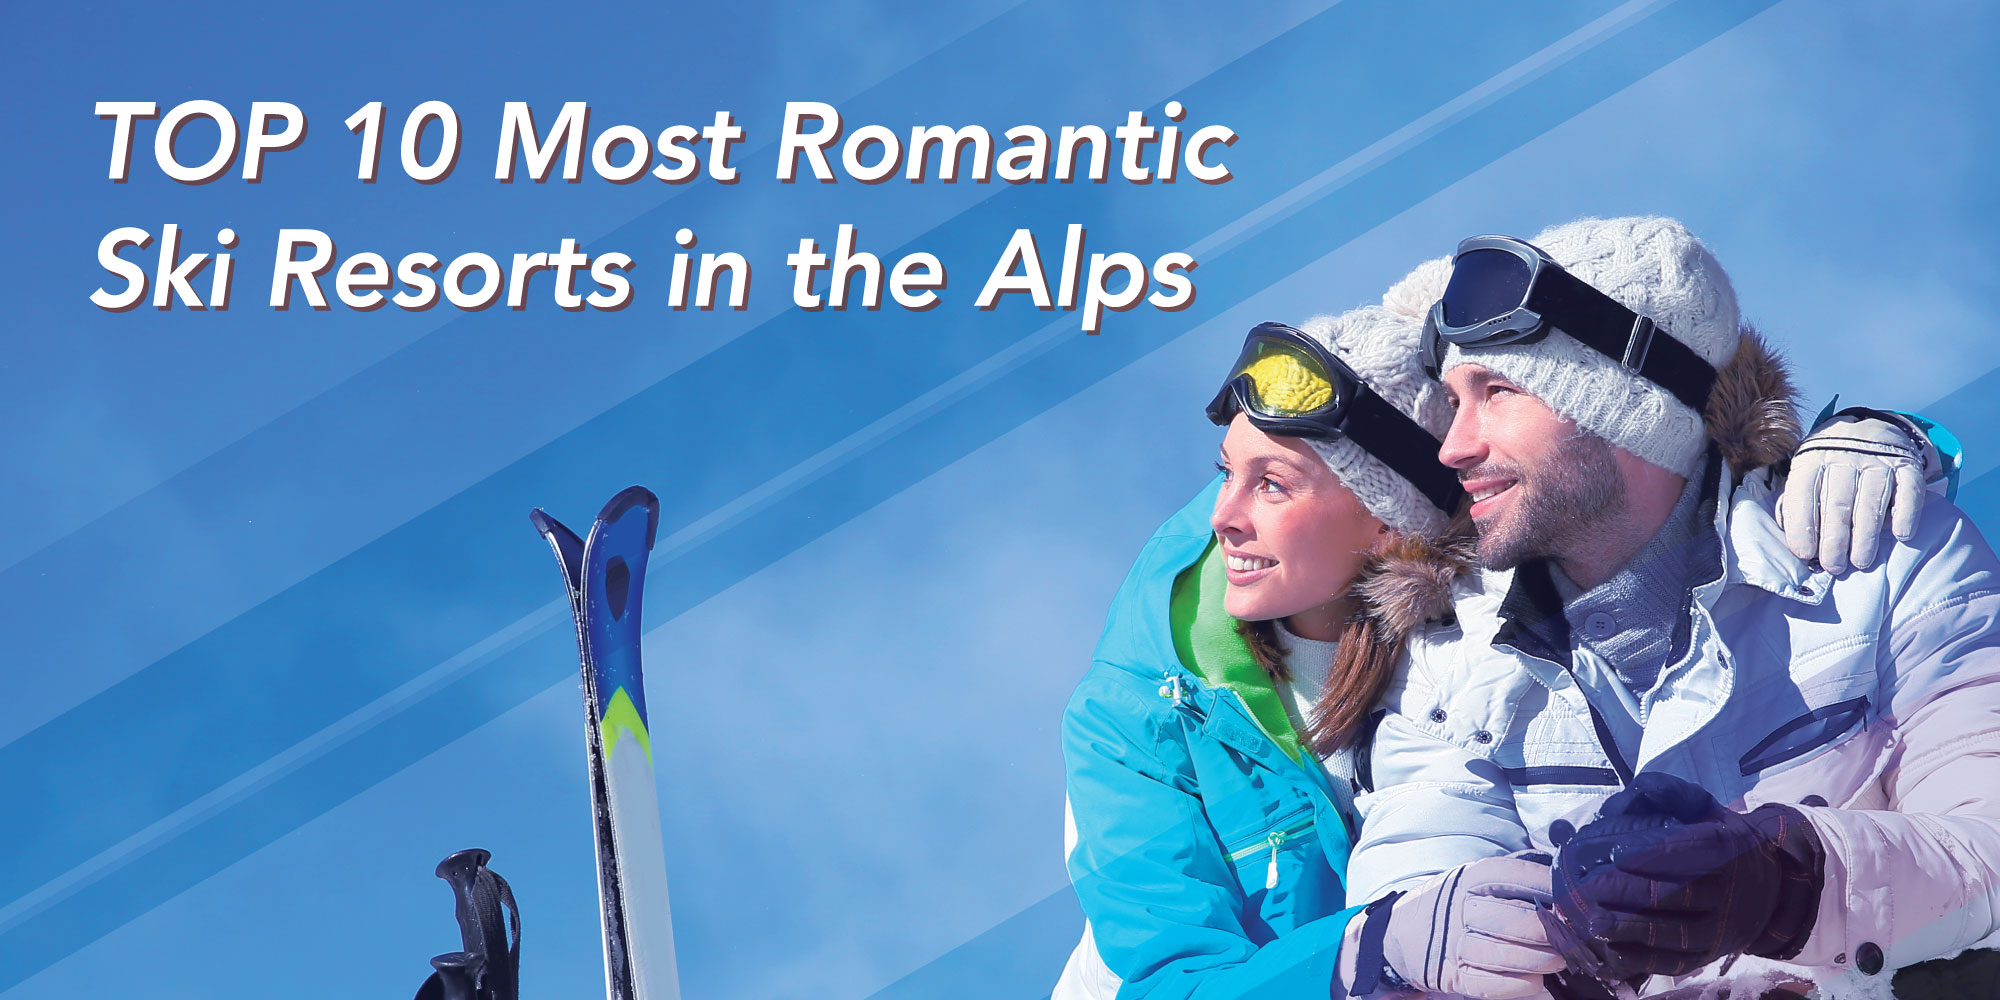 A couple wearing ski clothing with text: most romantic ski resorts in the Alps